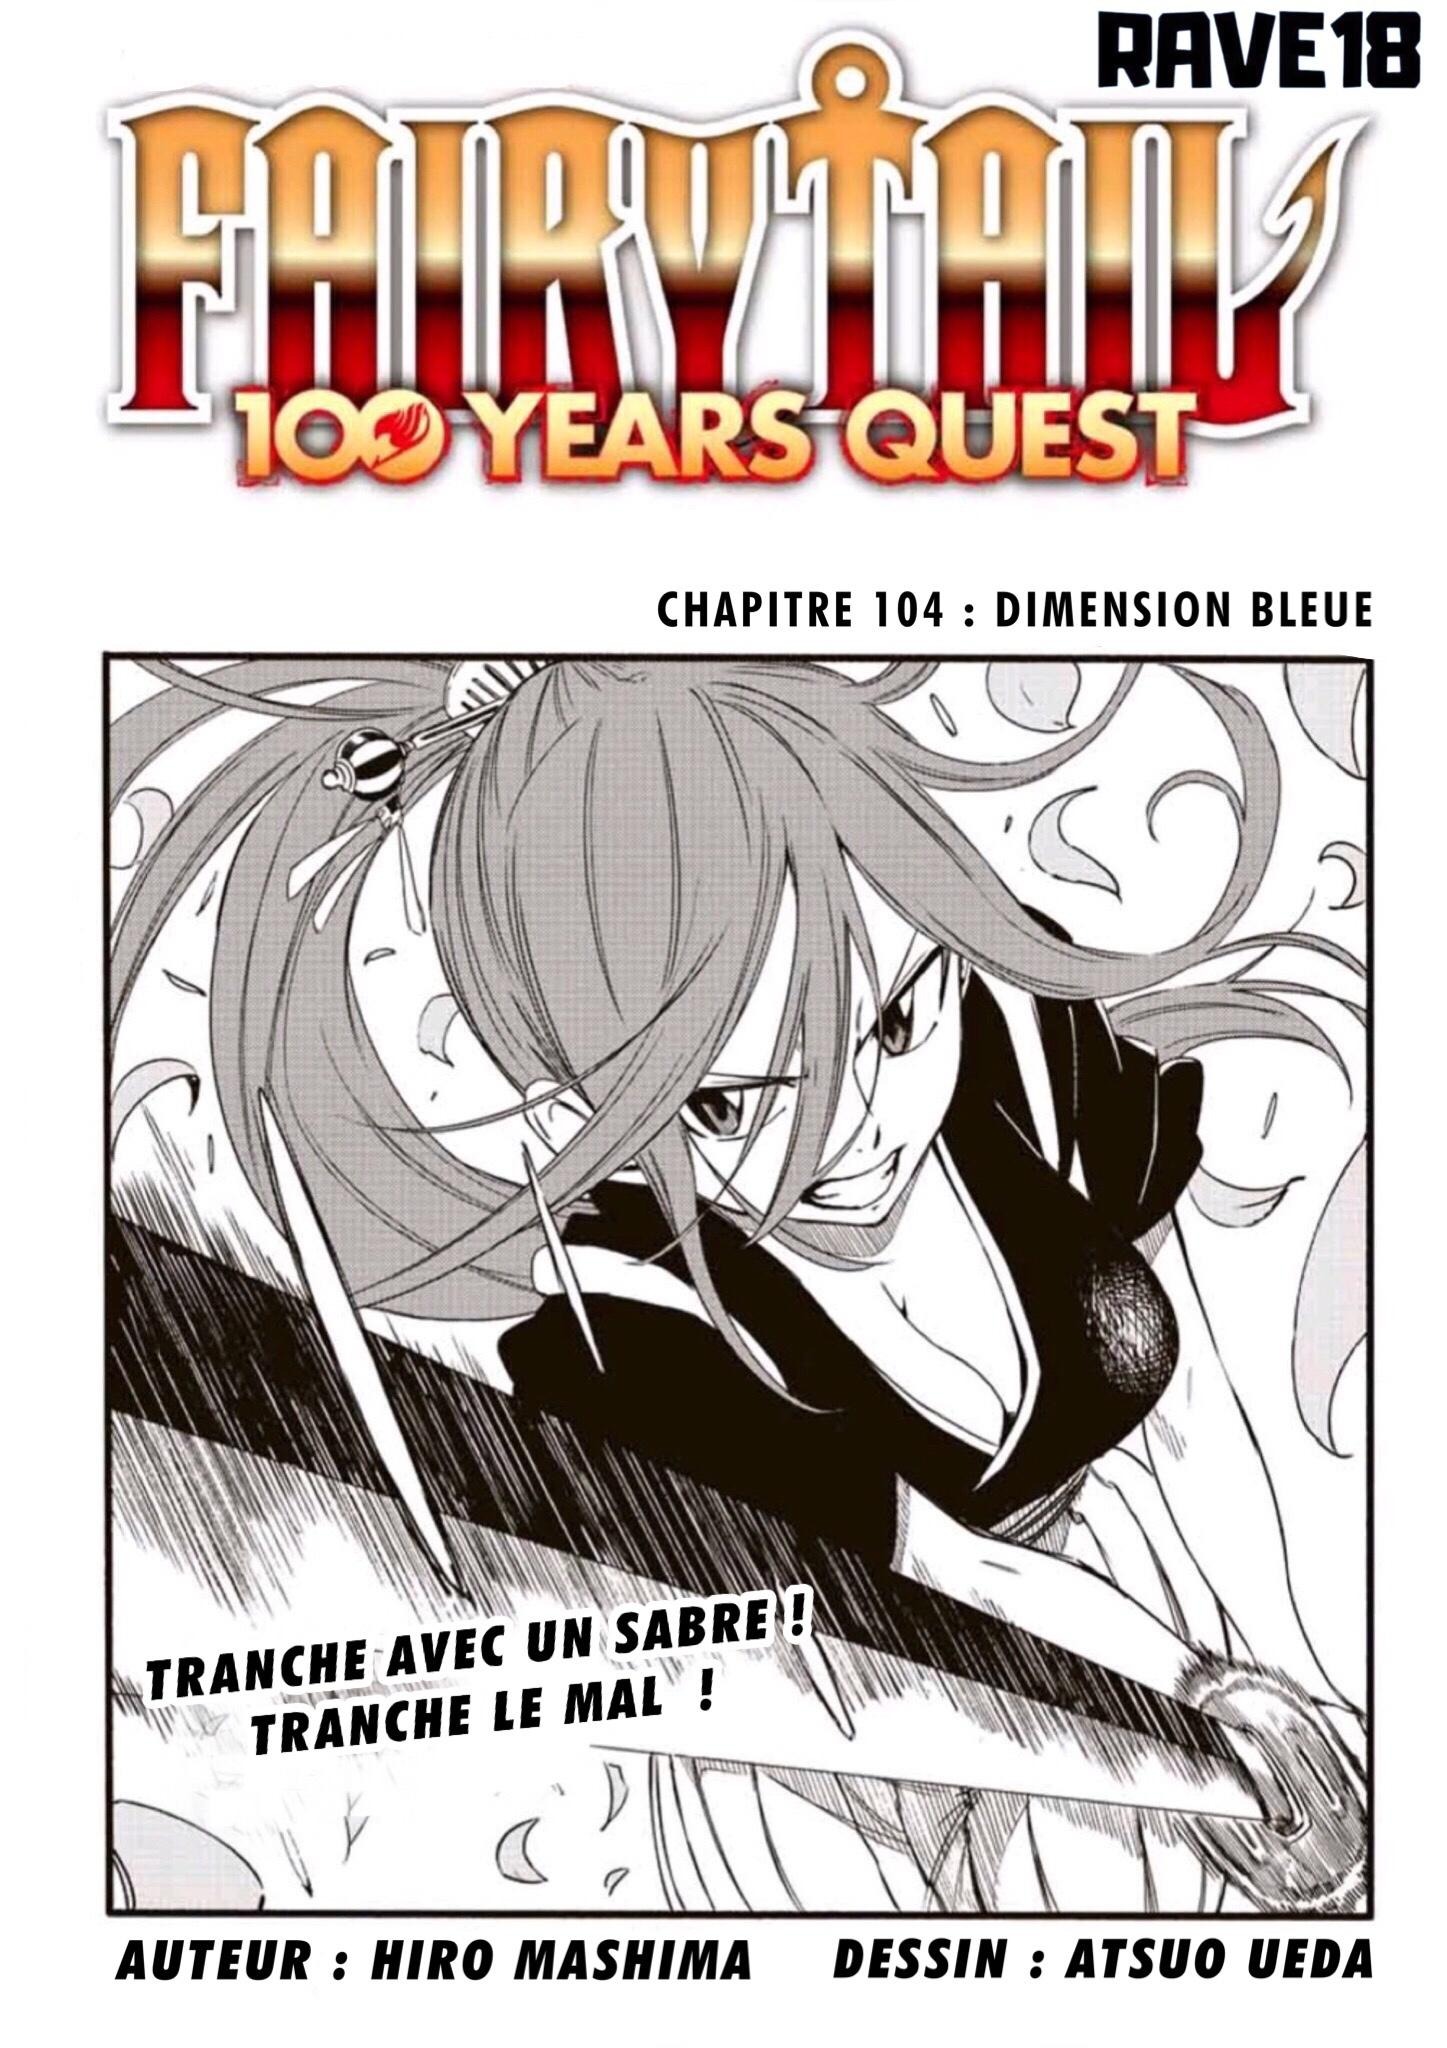 Fairy Tail 100 Years Quest: Chapter chapitre-104 - Page 1